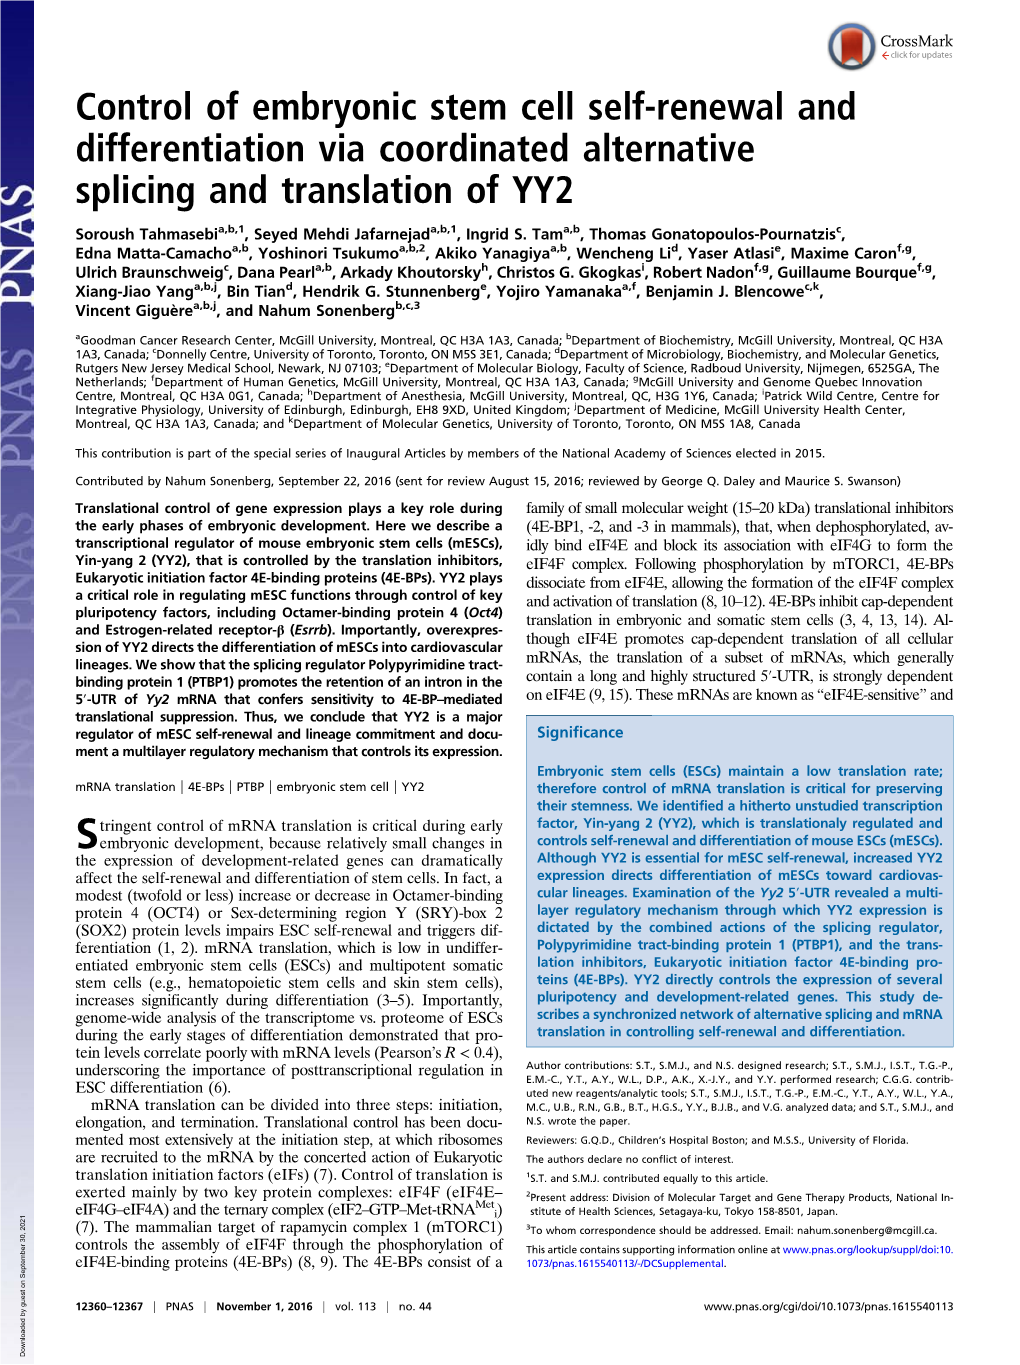 Control of Embryonic Stem Cell Self-Renewal and Differentiation Via Coordinated Alternative Splicing and Translation of YY2